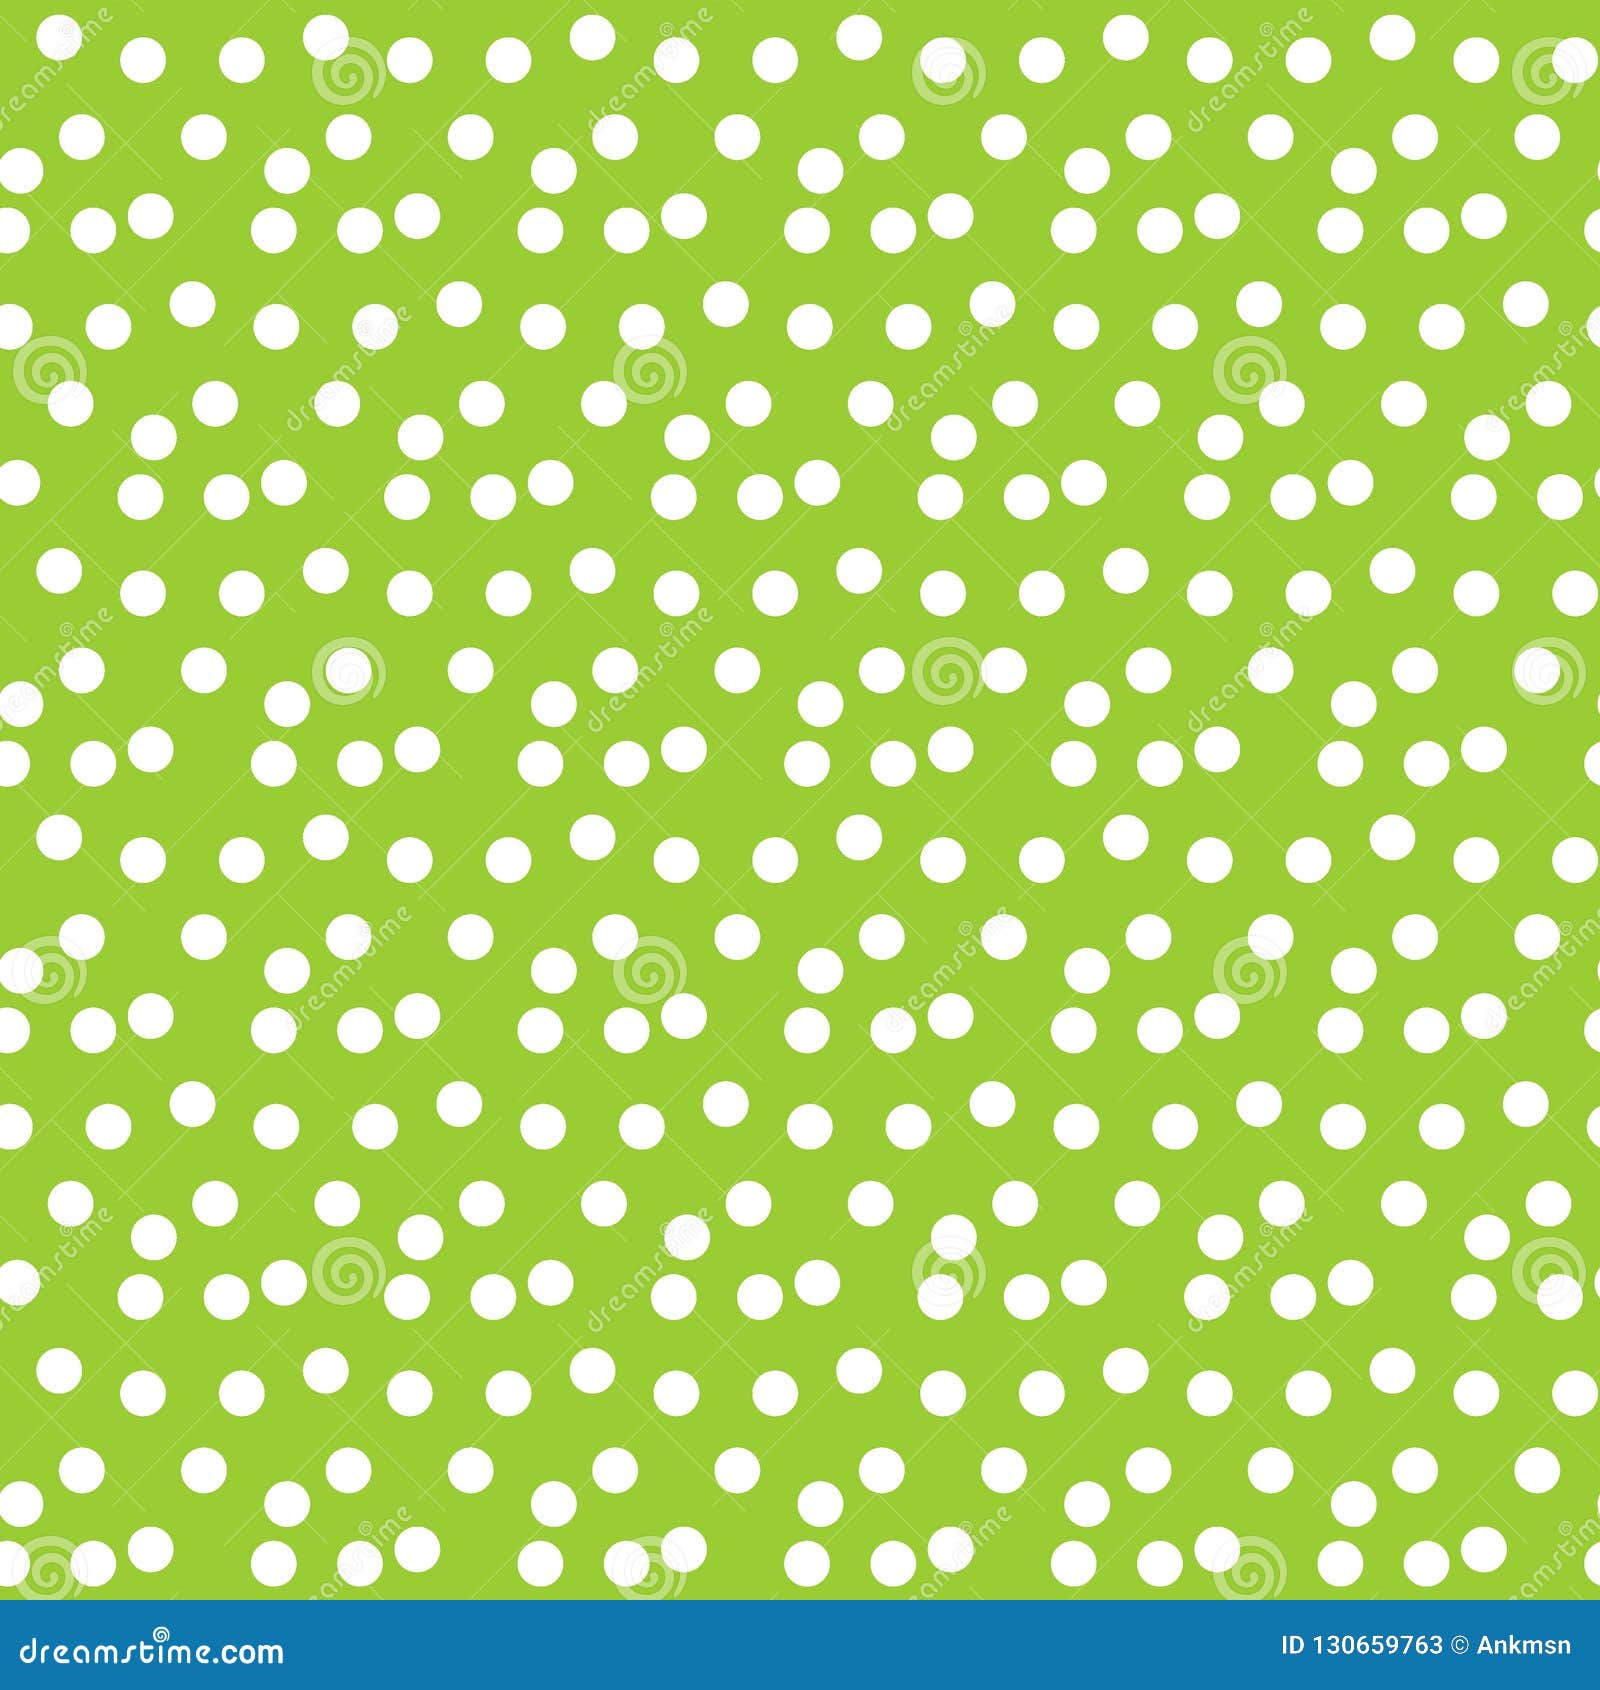 Green Background Random Scattered Circle Dots Seamless Pattern Stock ...